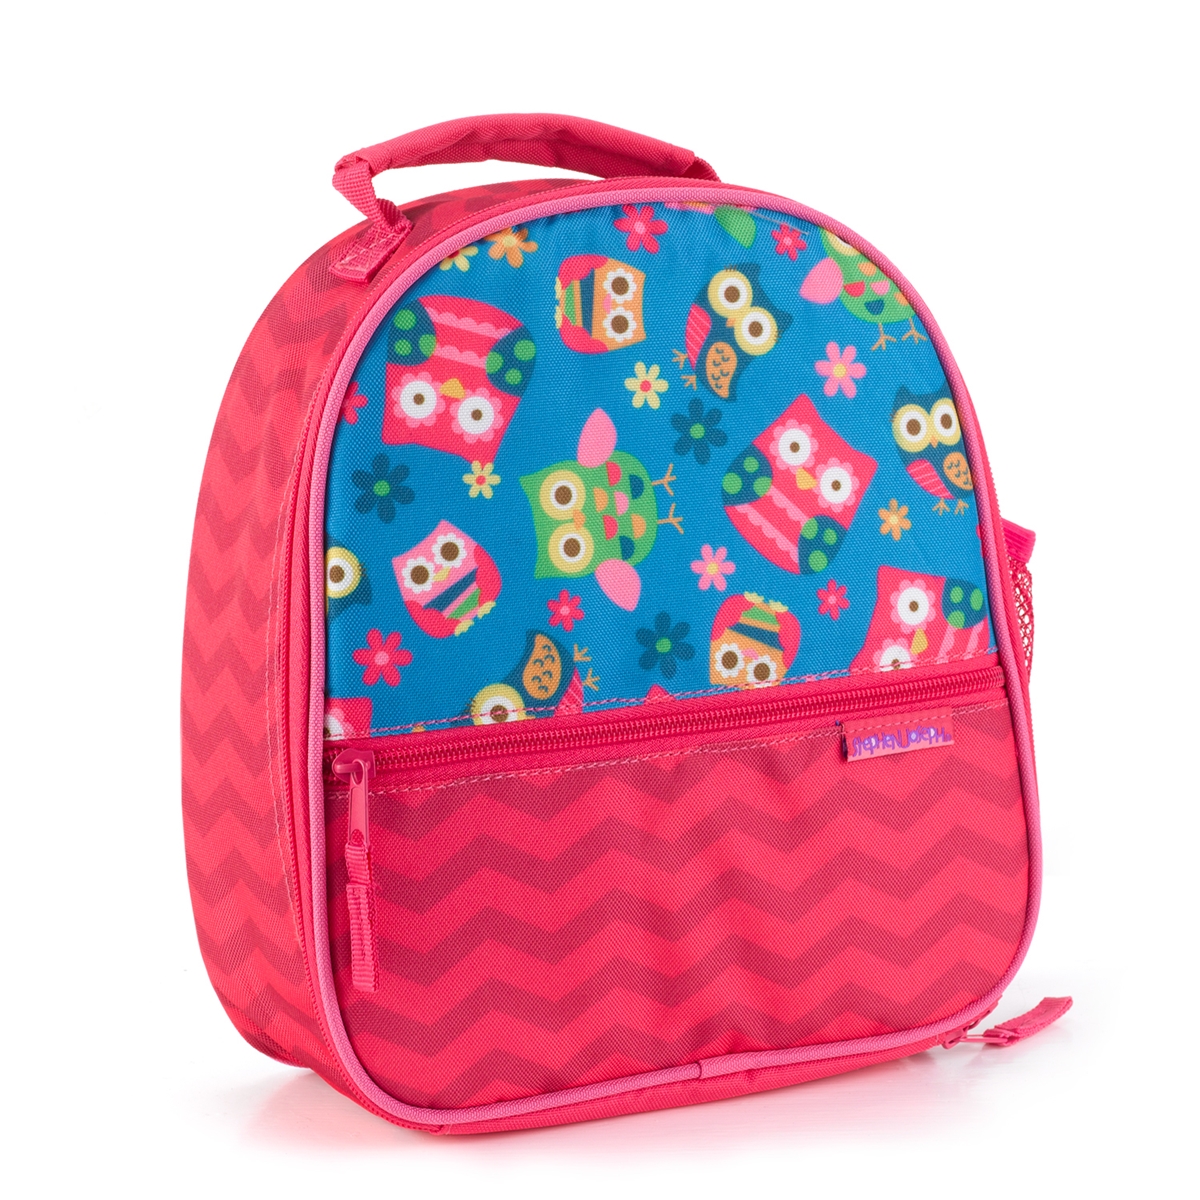 Personalised School Lunch Box Bag For Girls Owl Insulated Pink 